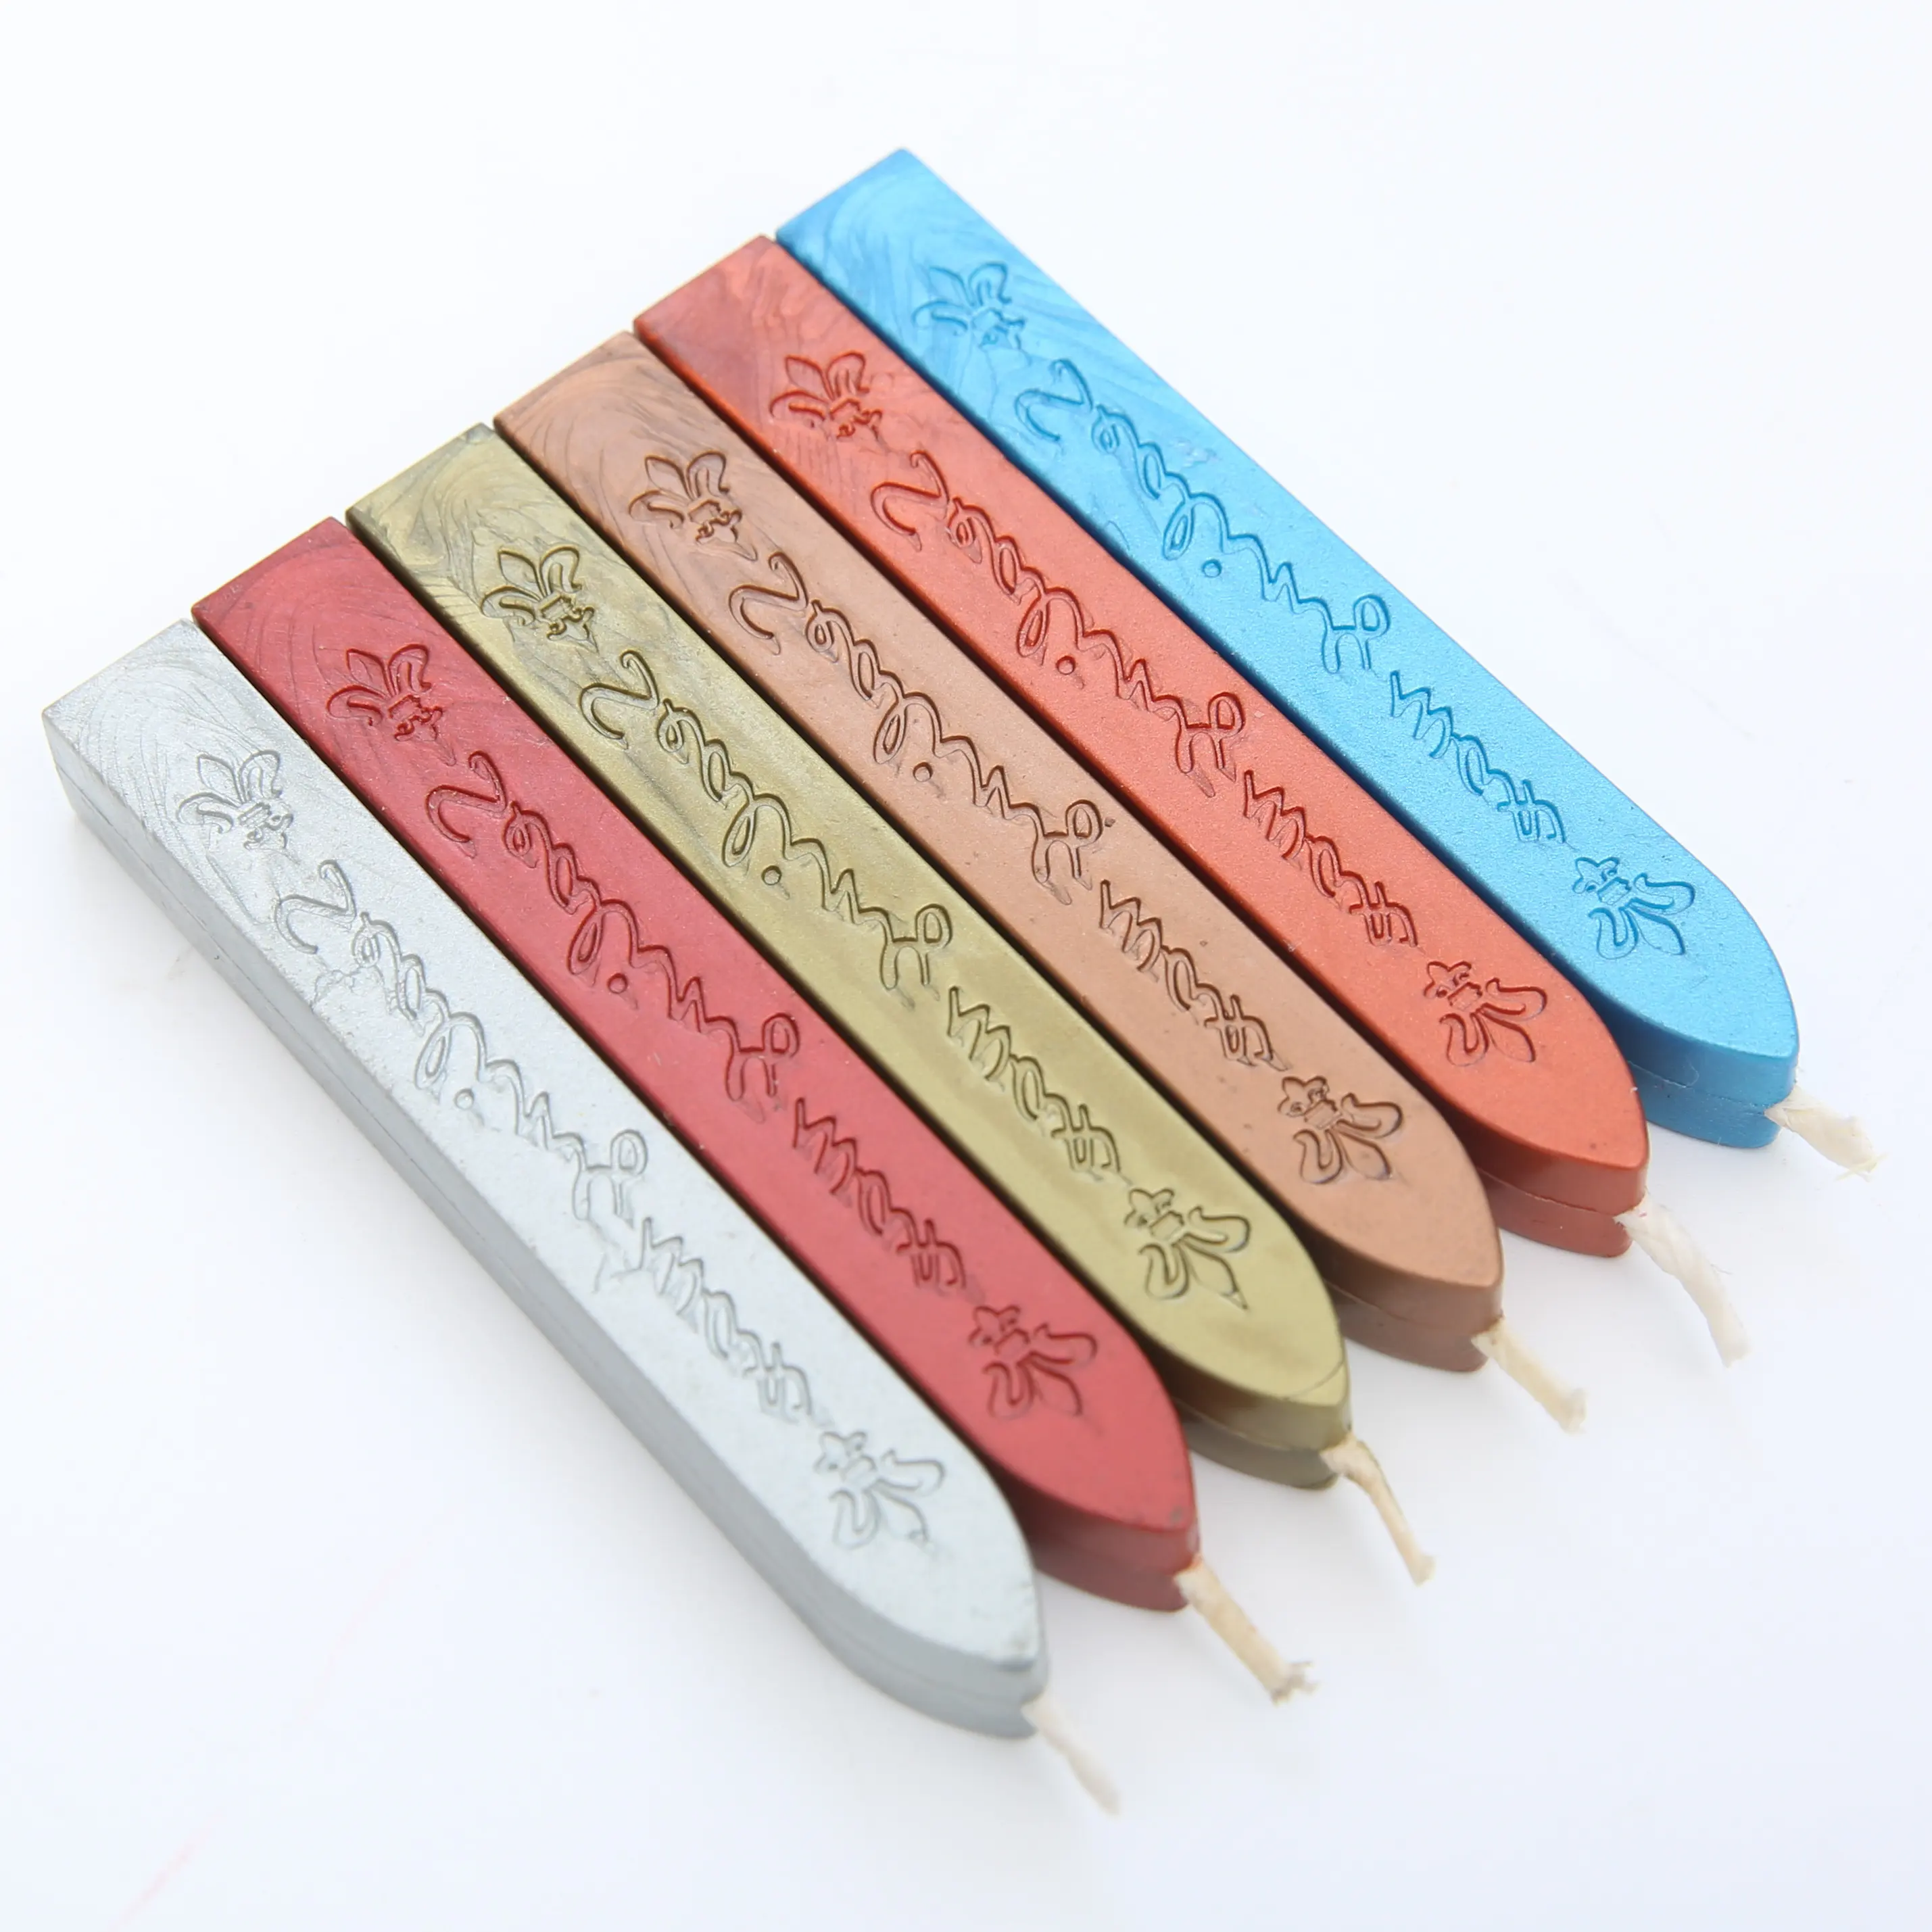 Colorful Wax Seal Sticks Customized Shapes Sealing wax sticks for wedding invitations